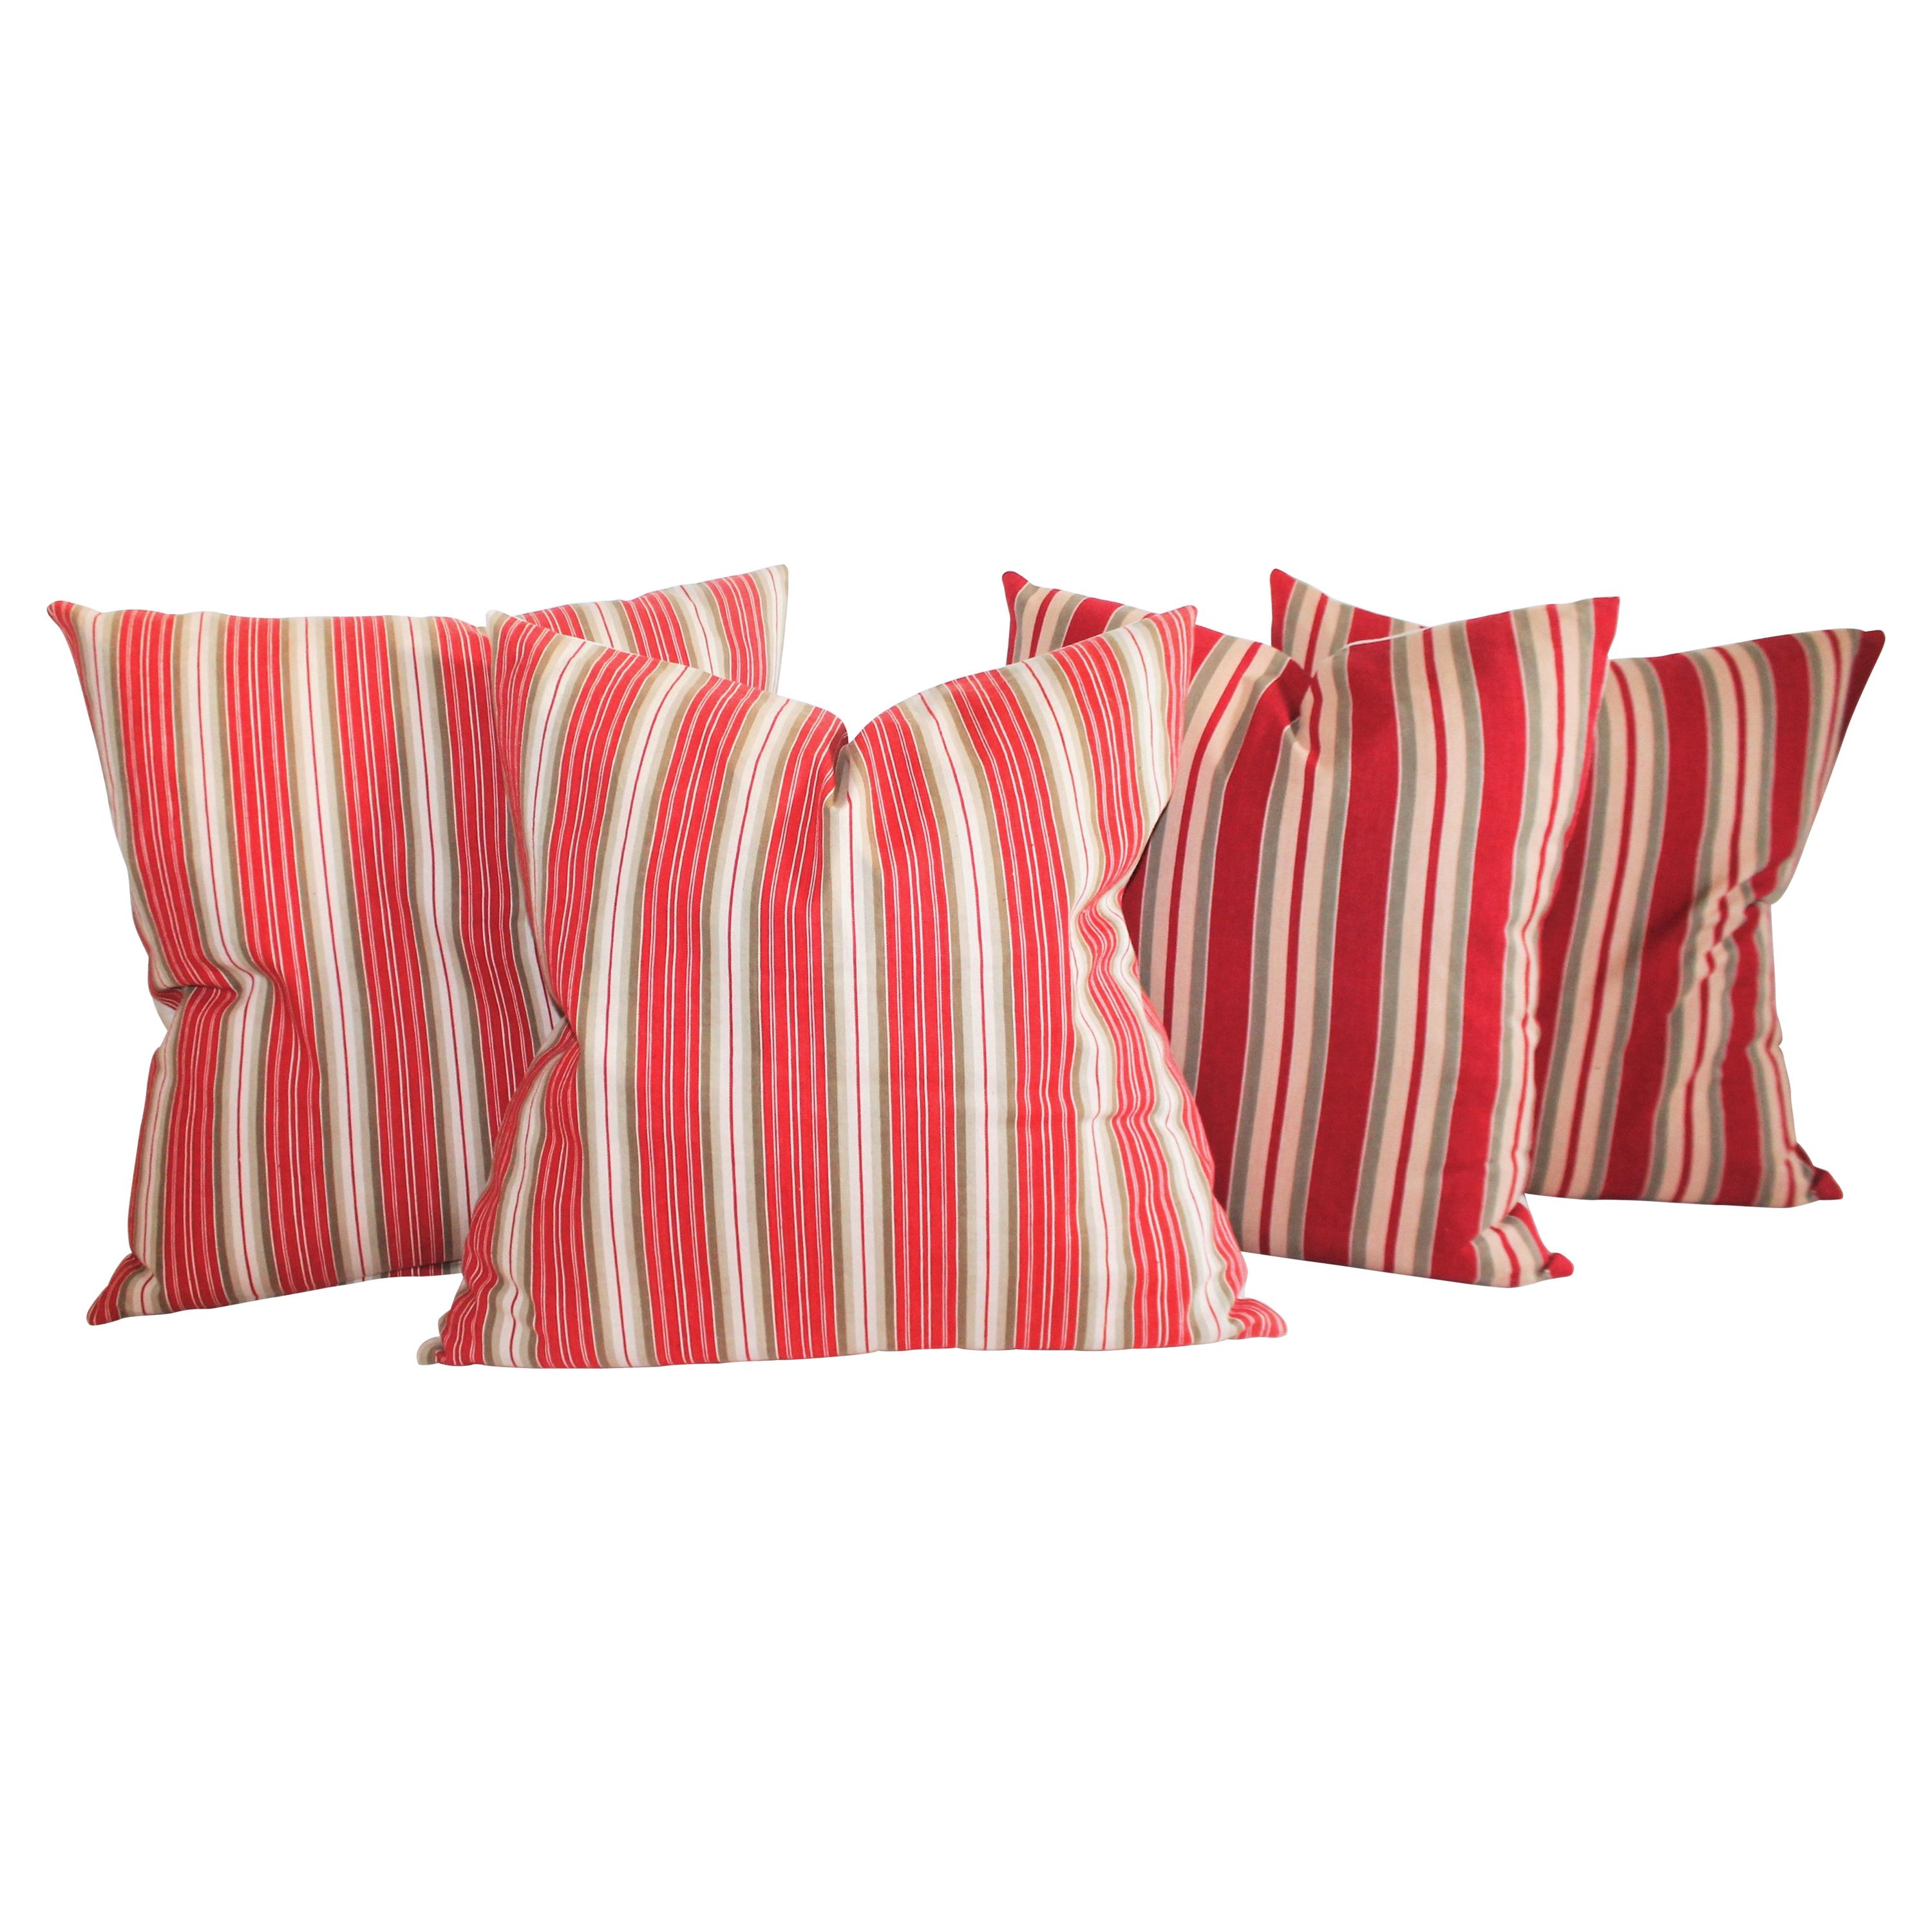 19th Century Red and Tan Striped Ticking Pillows / 2 Pairs